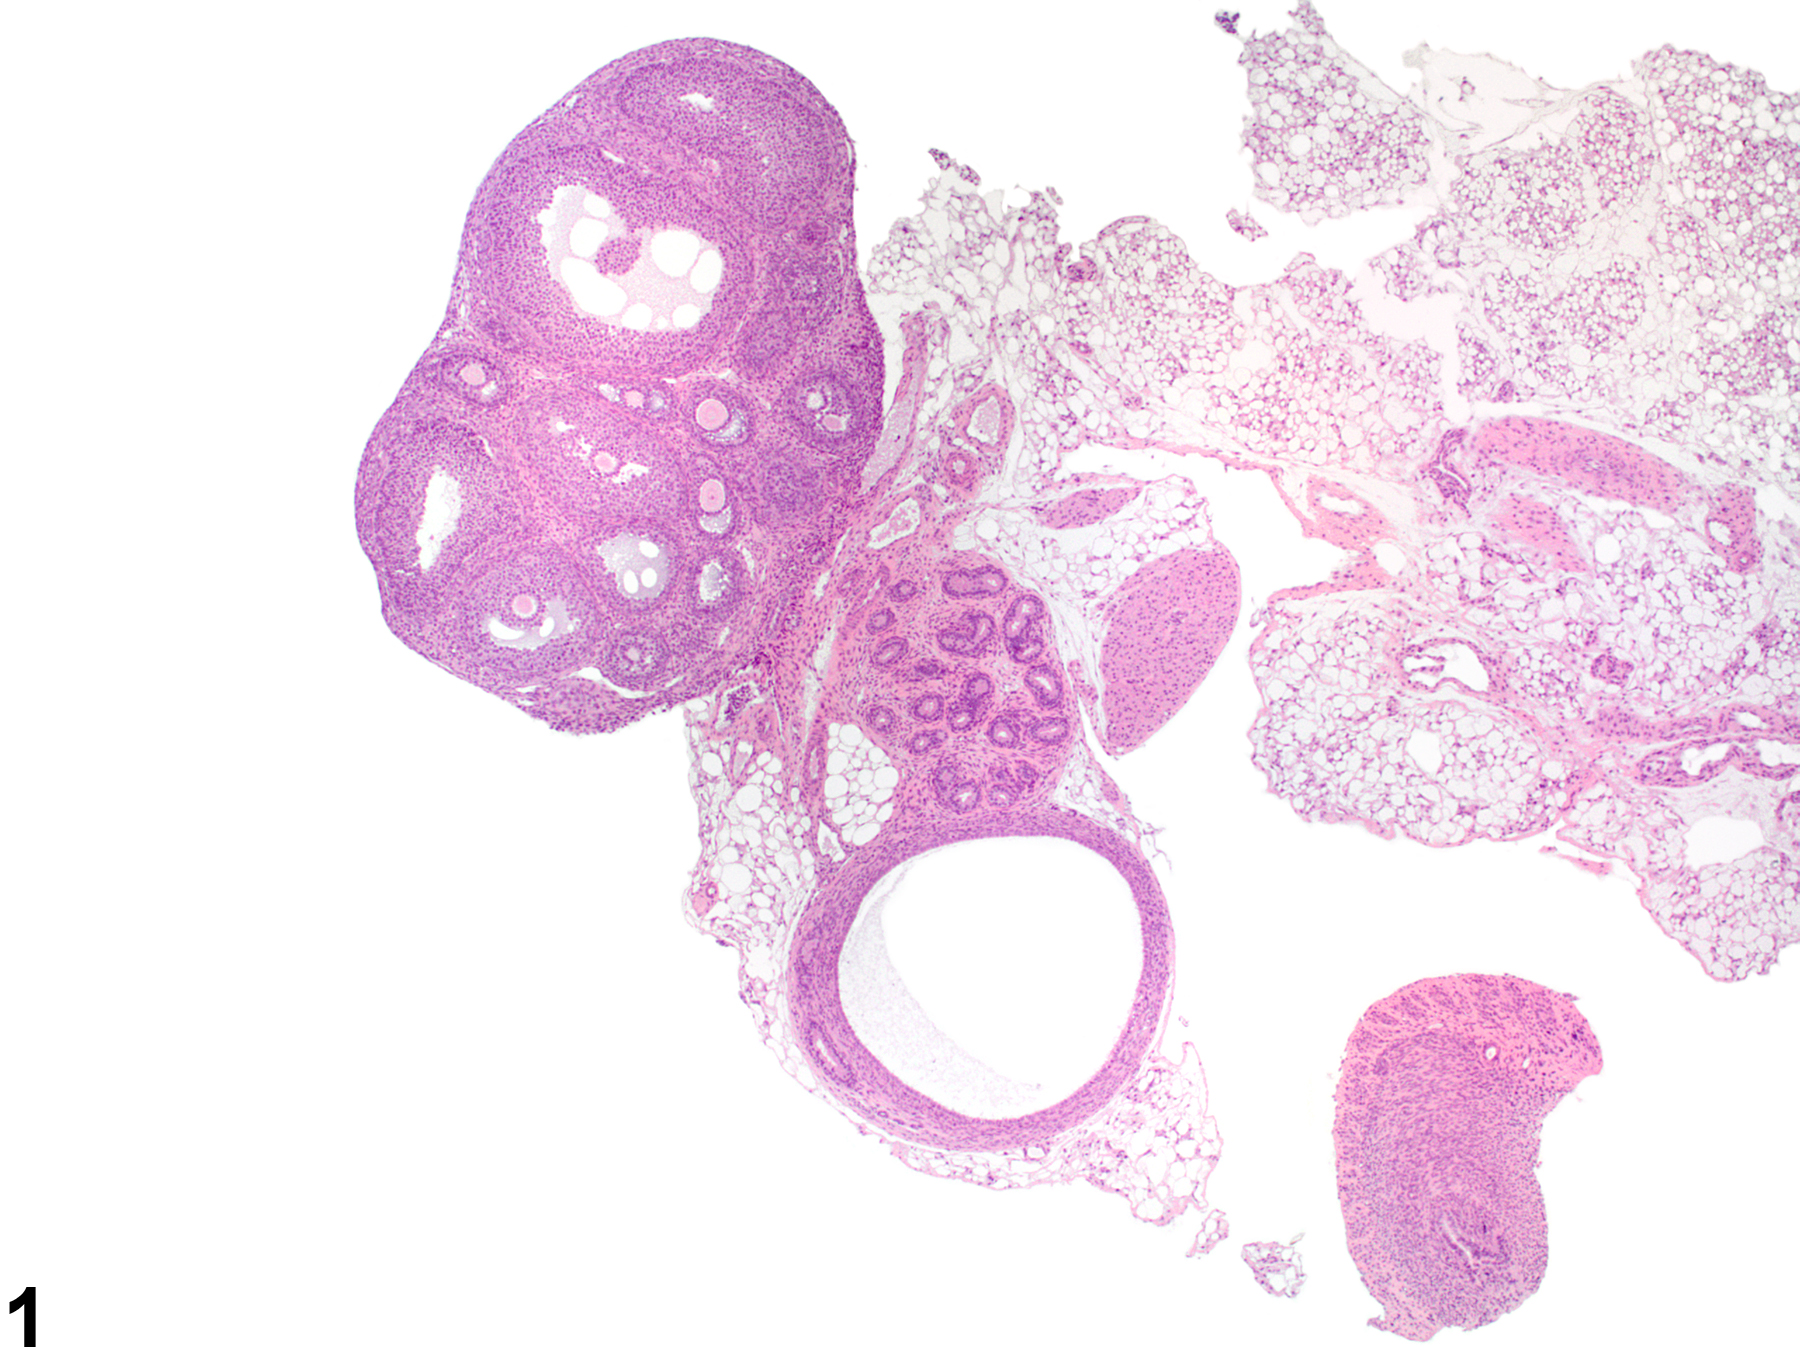 Image of mesonephric duct remnant in the ovary from a female Wistar Han rat in a subchronic study